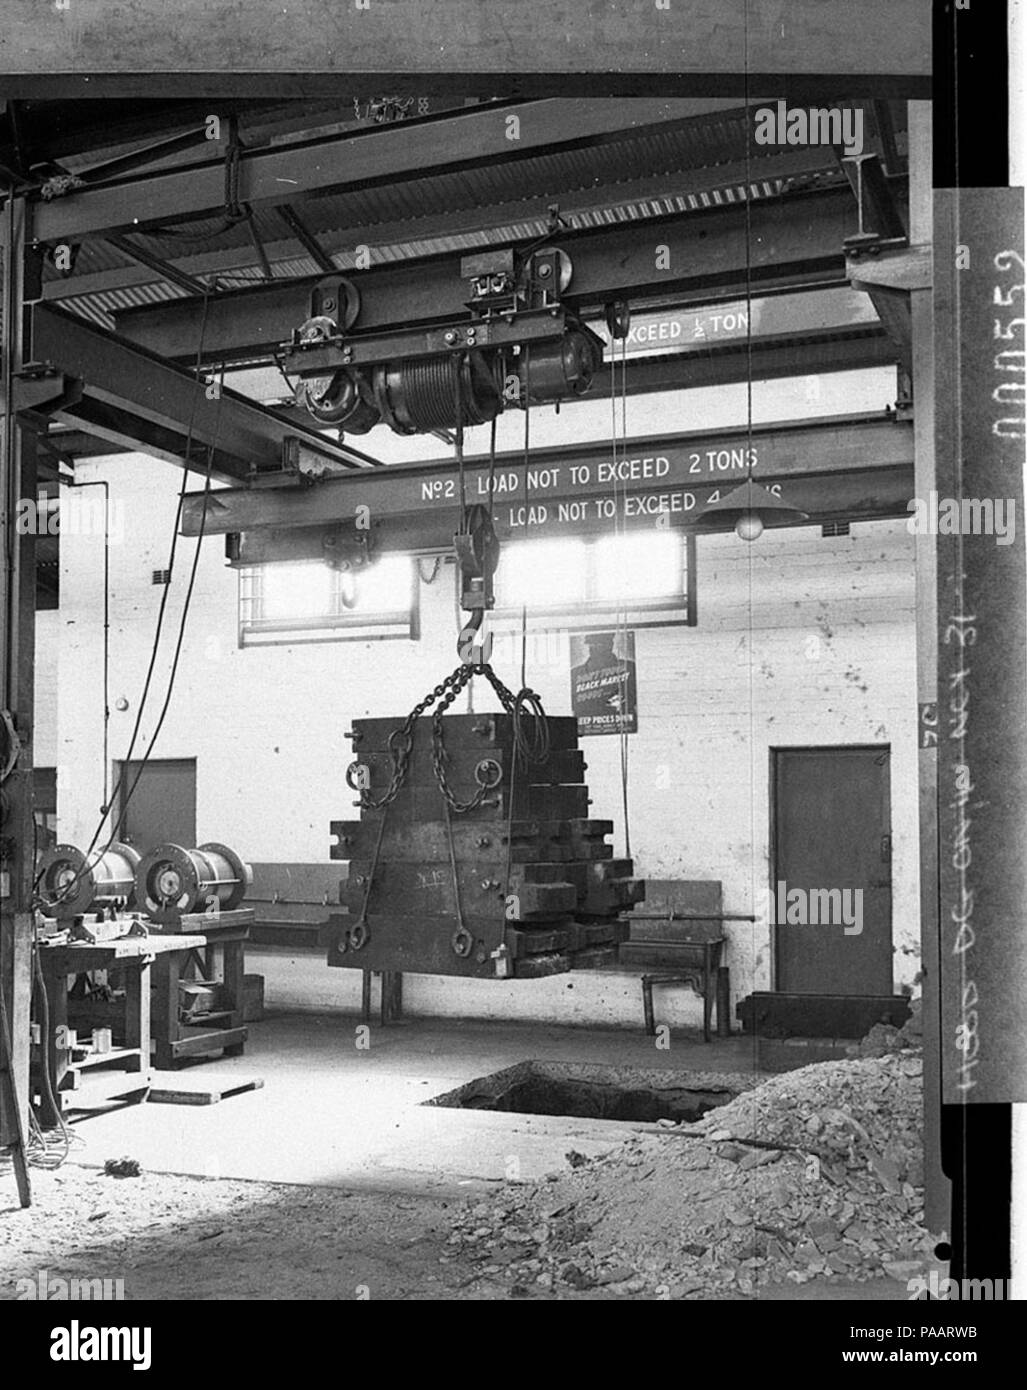 238 SLNSW 13043 Workshop scene showing two ton electric hoist doing a lift Wartime sign Dont help the black market Stock Photo